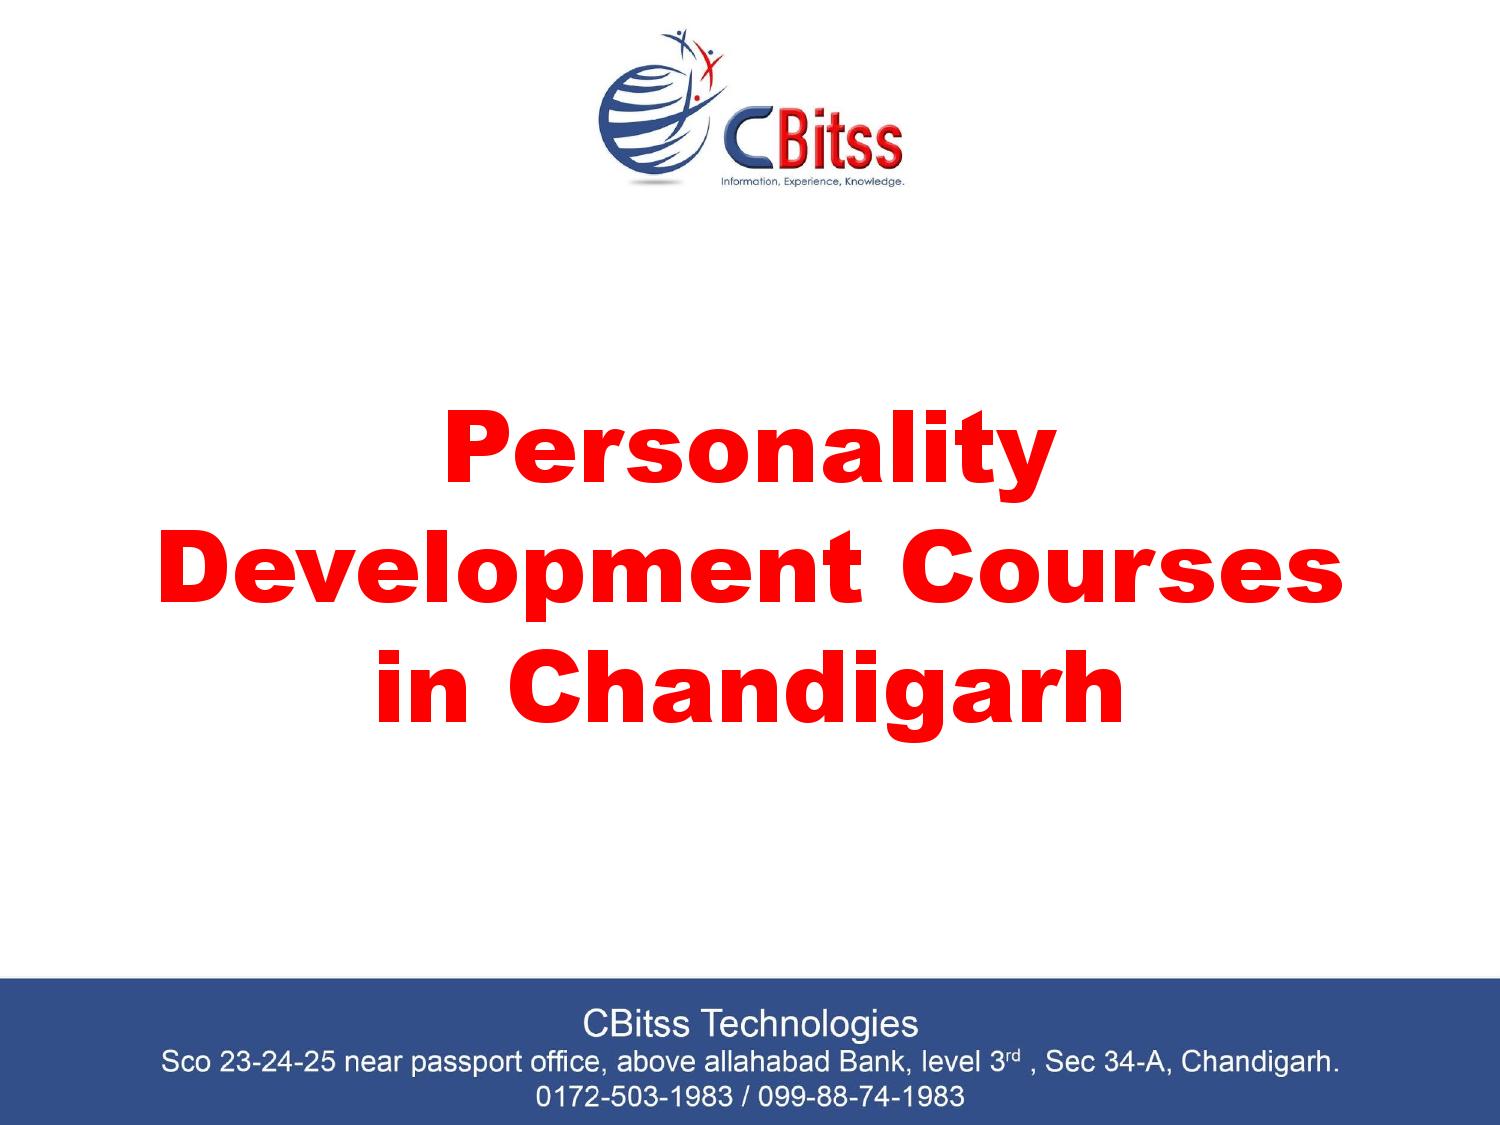 Personality Development Course in Chandigarh